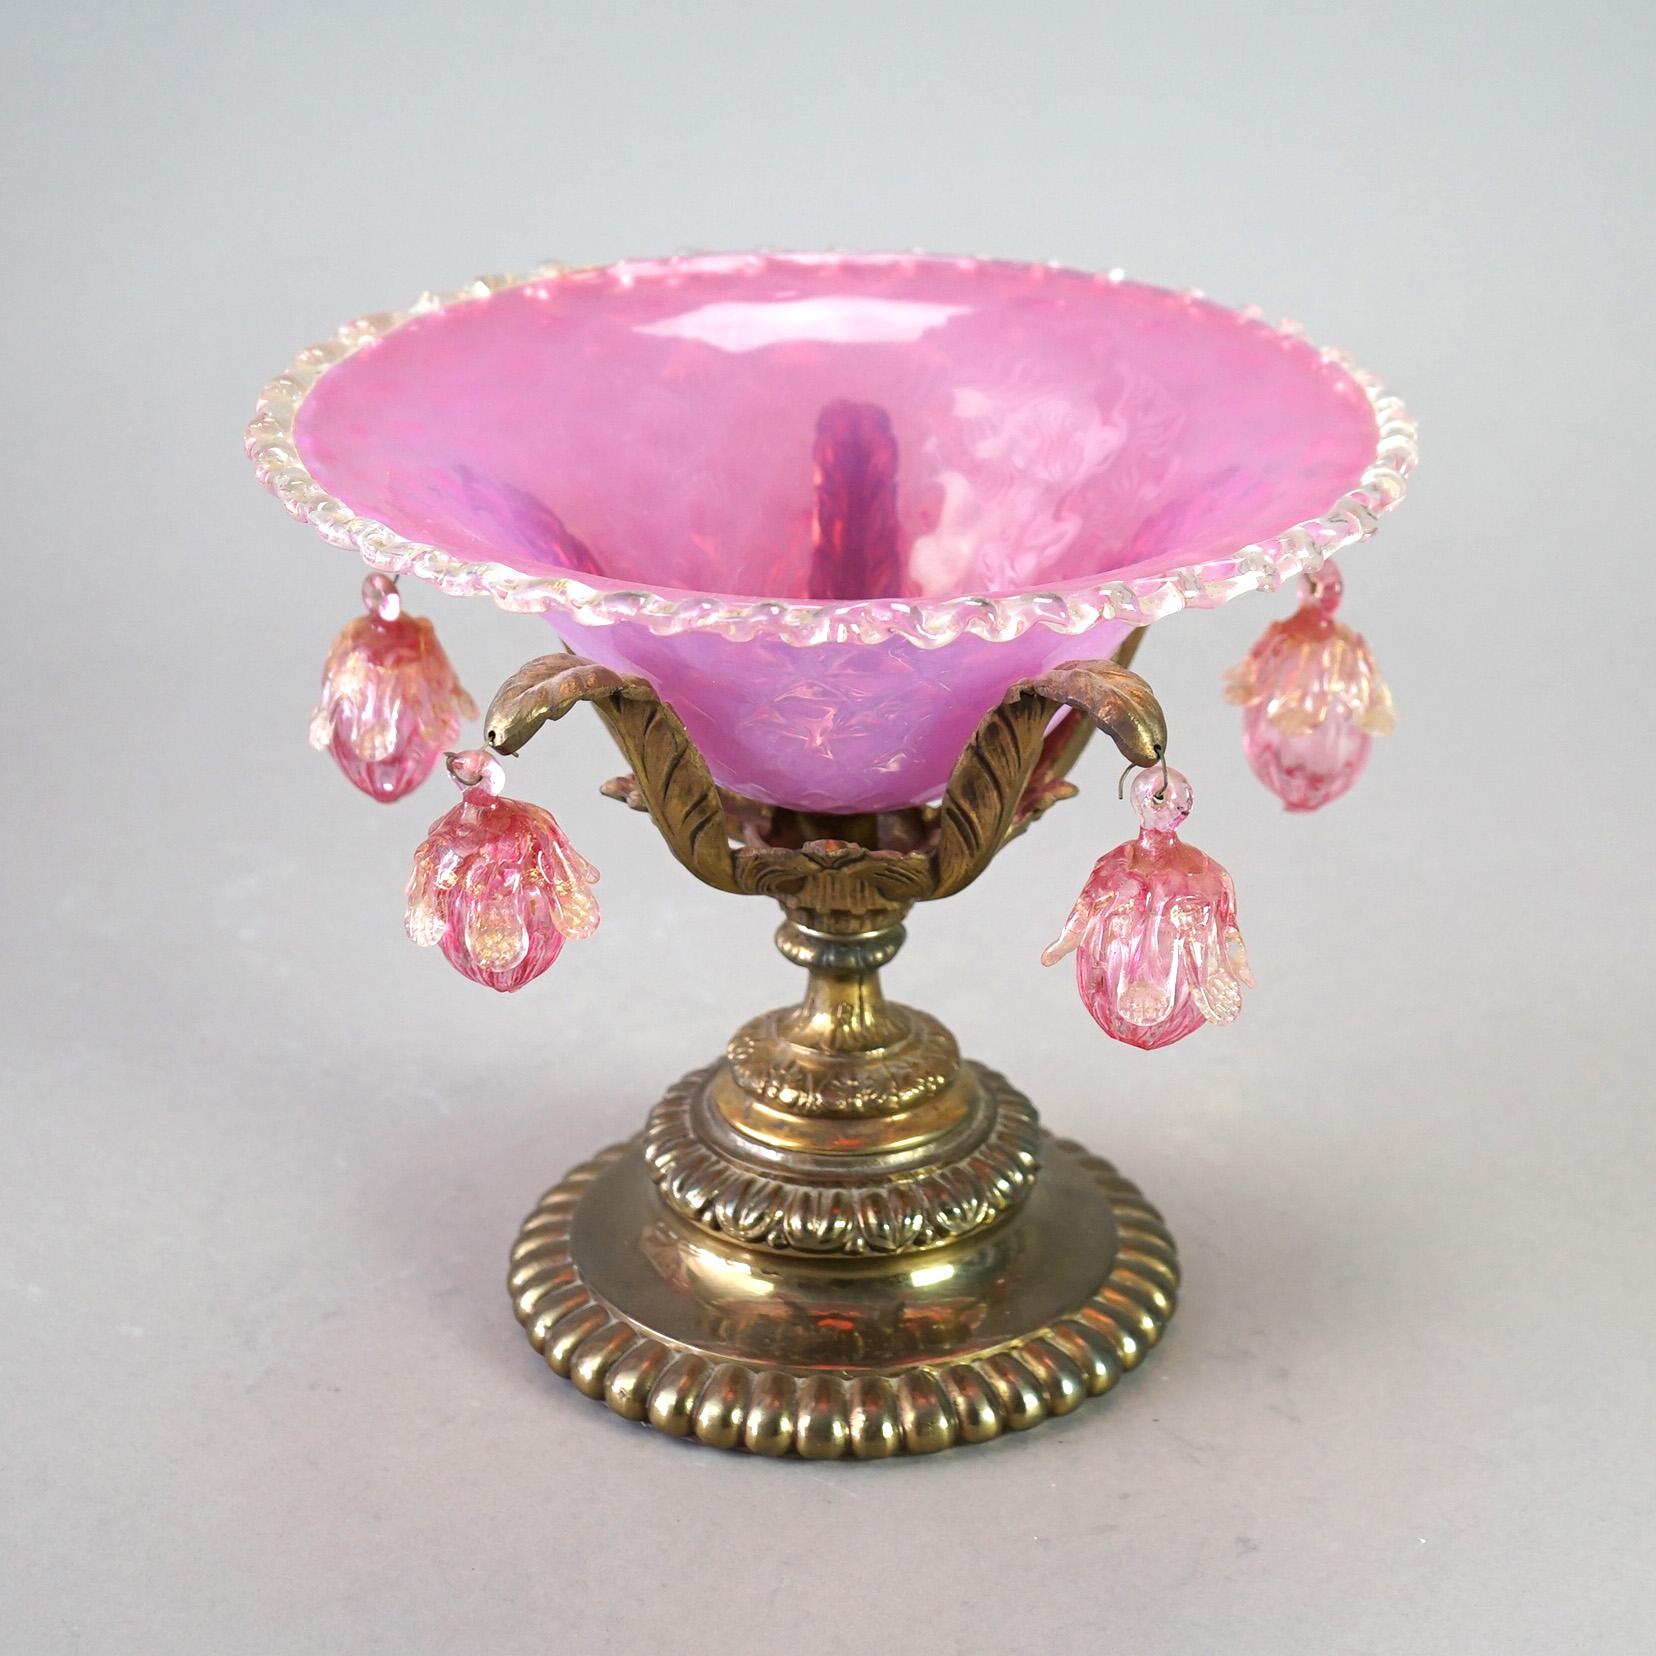 An antique Venetian compote offers Murano pink glass bowl having ruffled rim seated in foliate form cast base with hanging blown glass ornaments, c1890

Measures- 8.75''H x 10''W x 10''D